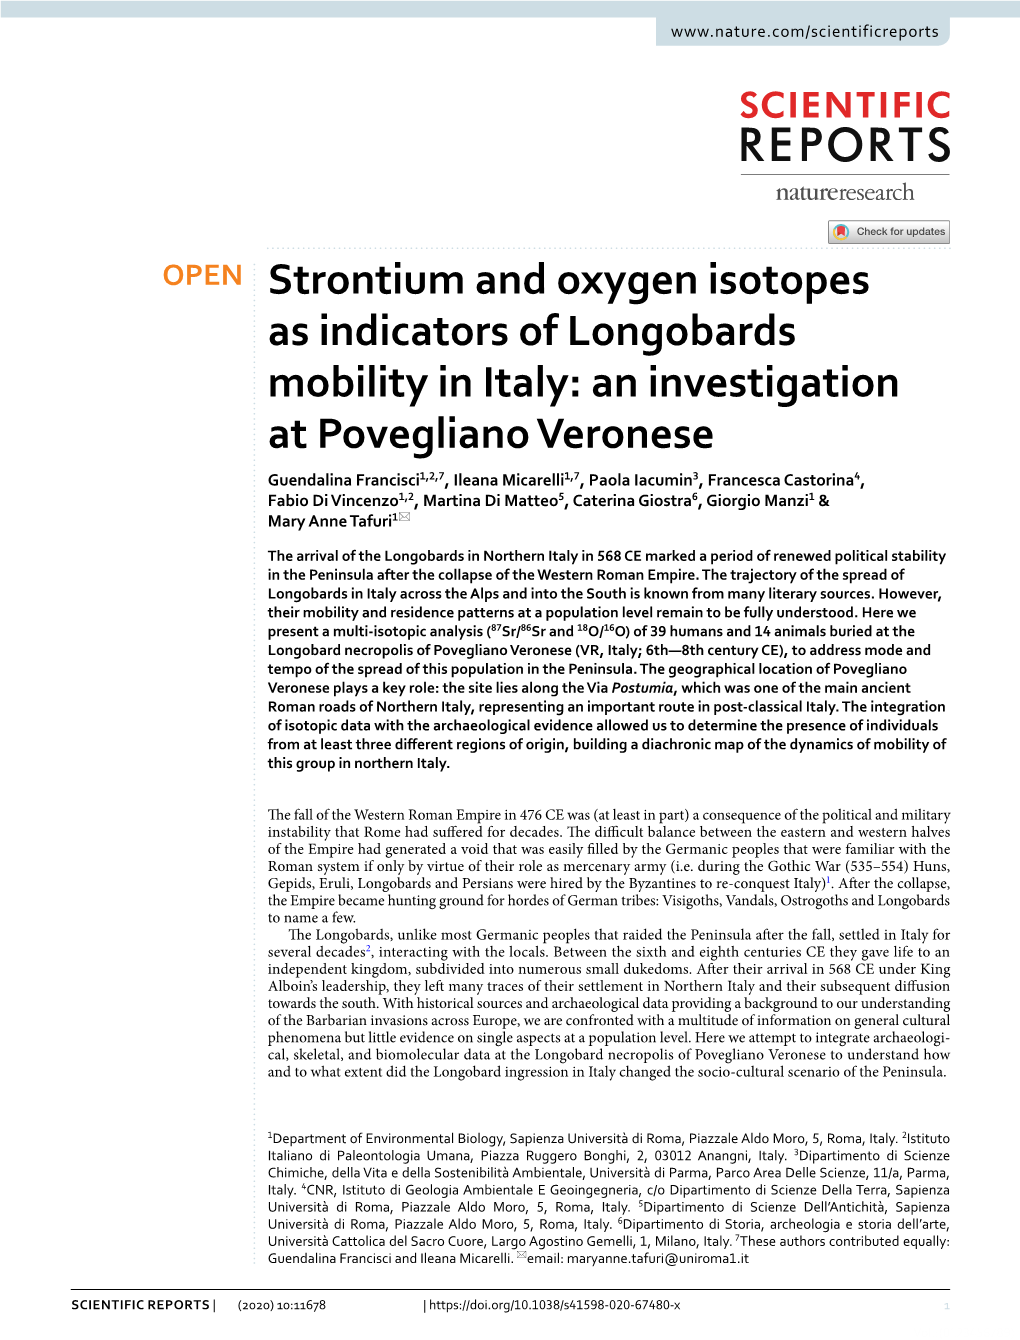 Strontium and Oxygen Isotopes As Indicators of Longobards Mobility In